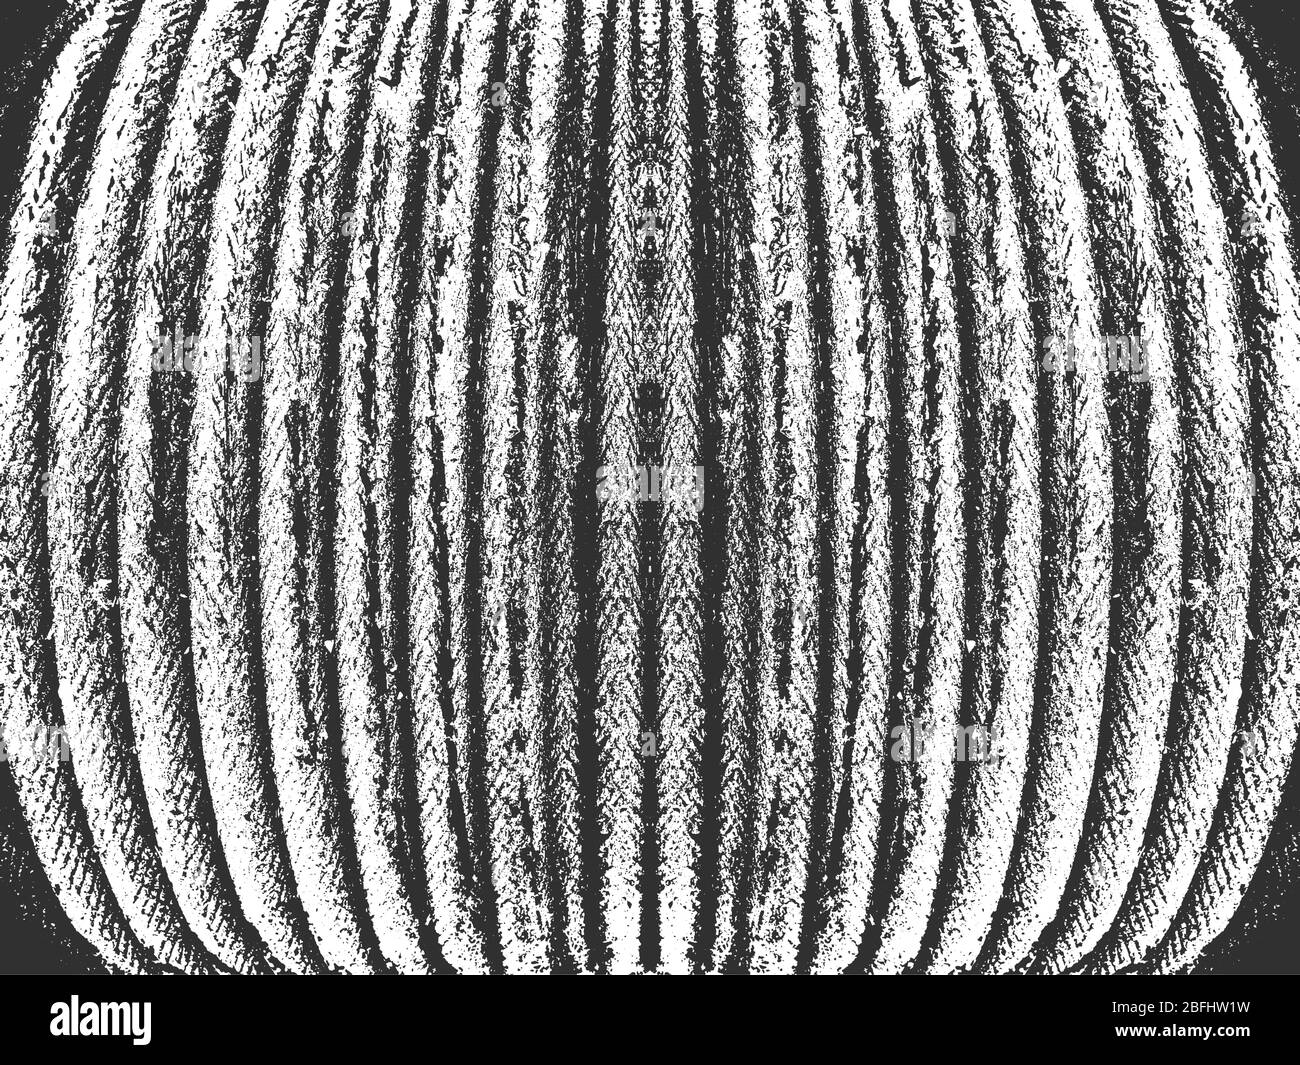 Distress grunge vector texture of rope. Black and white background. EPS 8 illustration Stock Vector